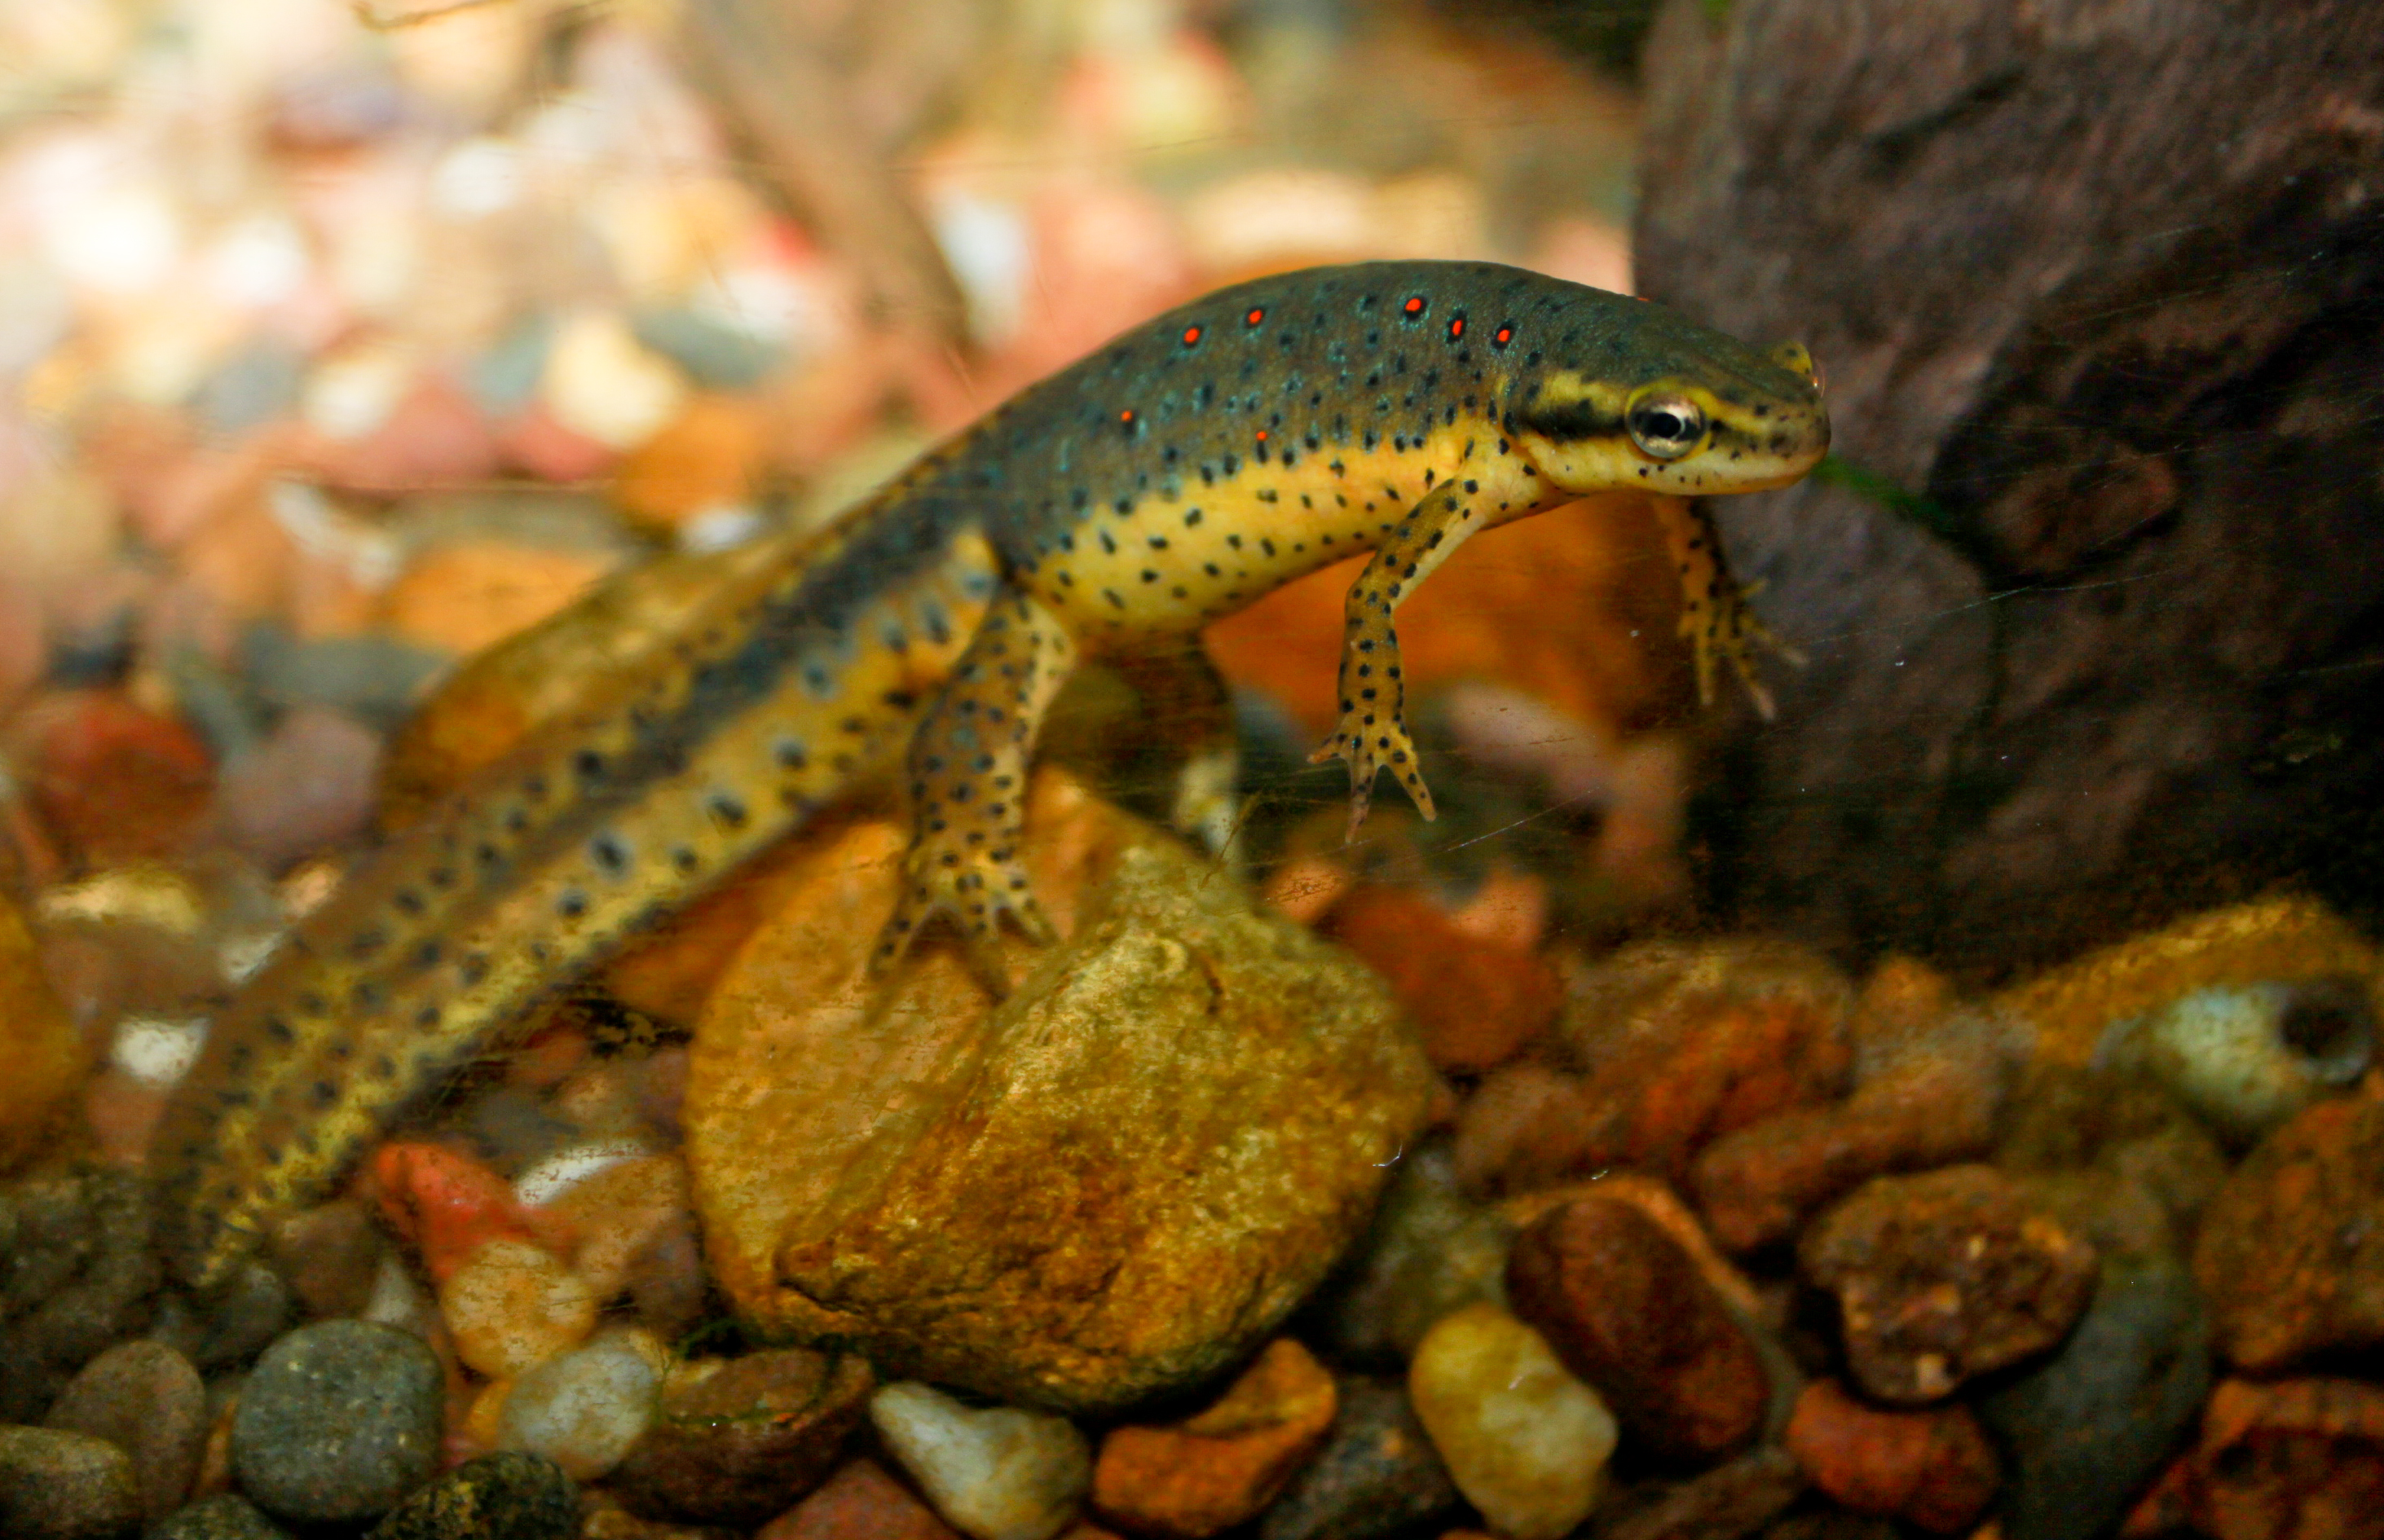 File:Redspotted newt.jpg - Wikimedia Commons